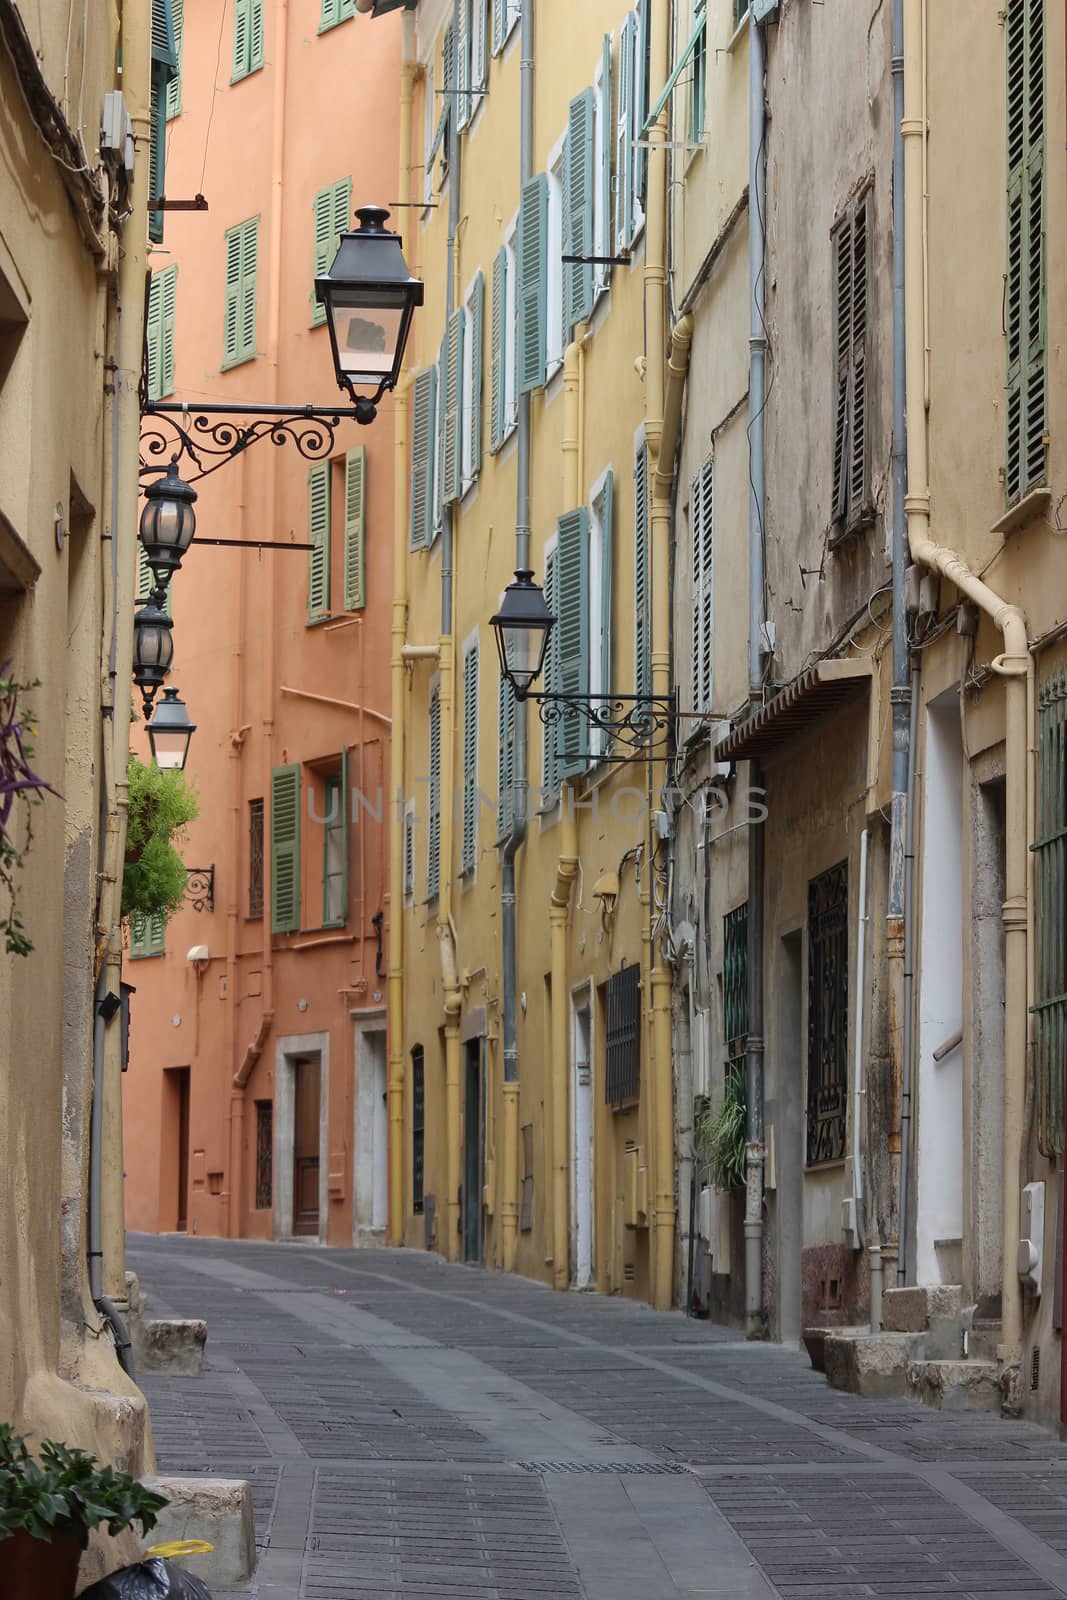 Typical Street in the Old Menton by bensib